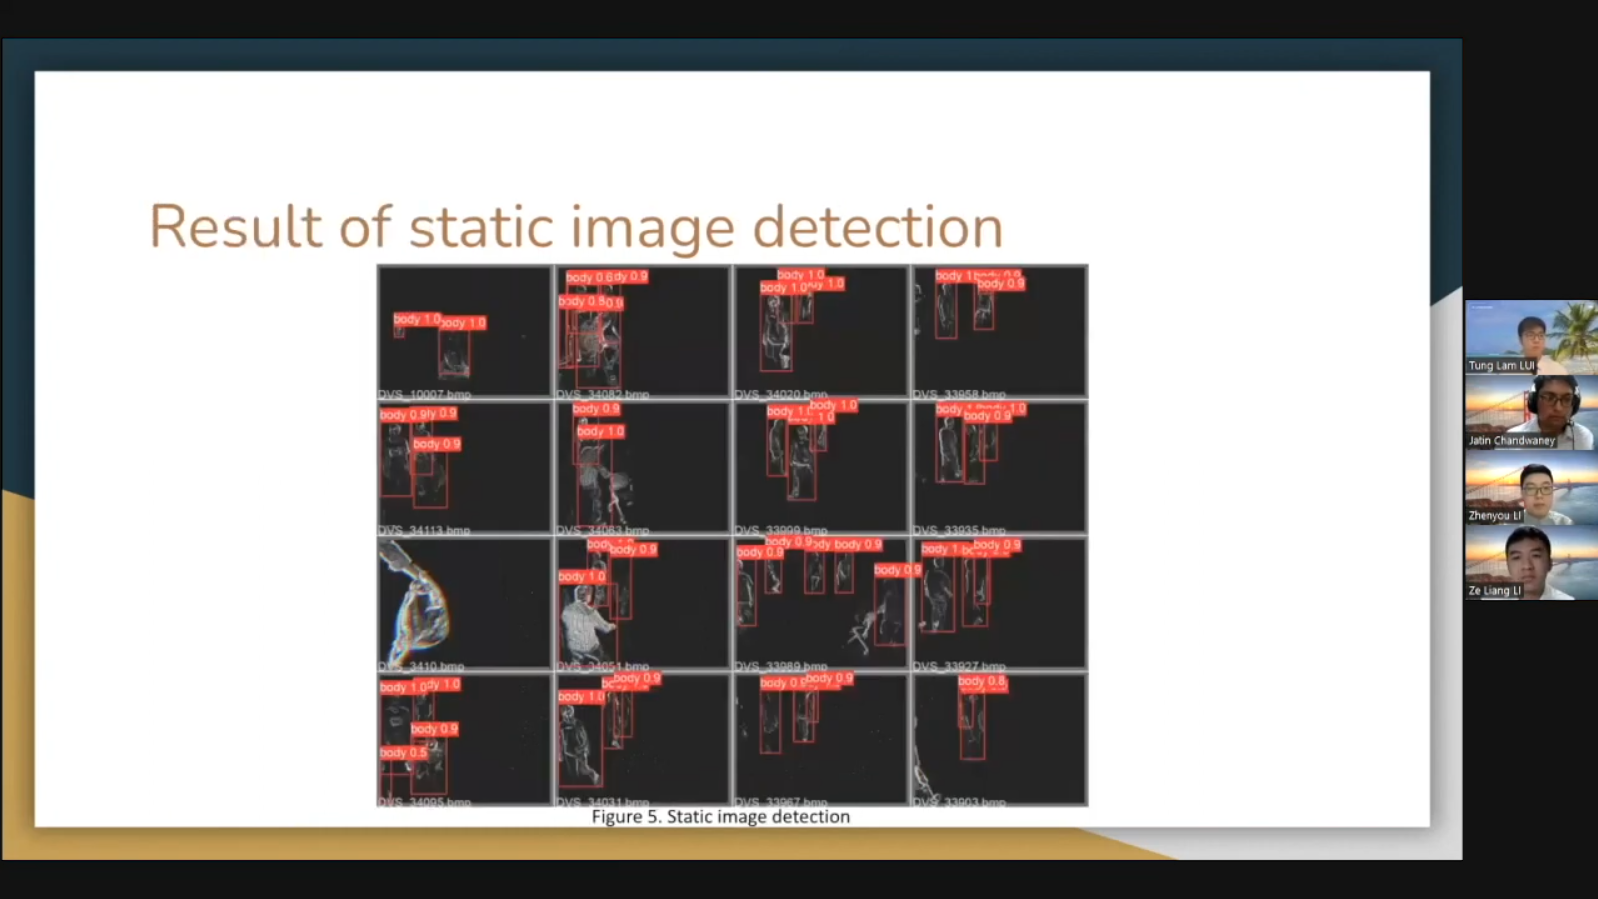 Using event camera to detect, track, and classify the human body